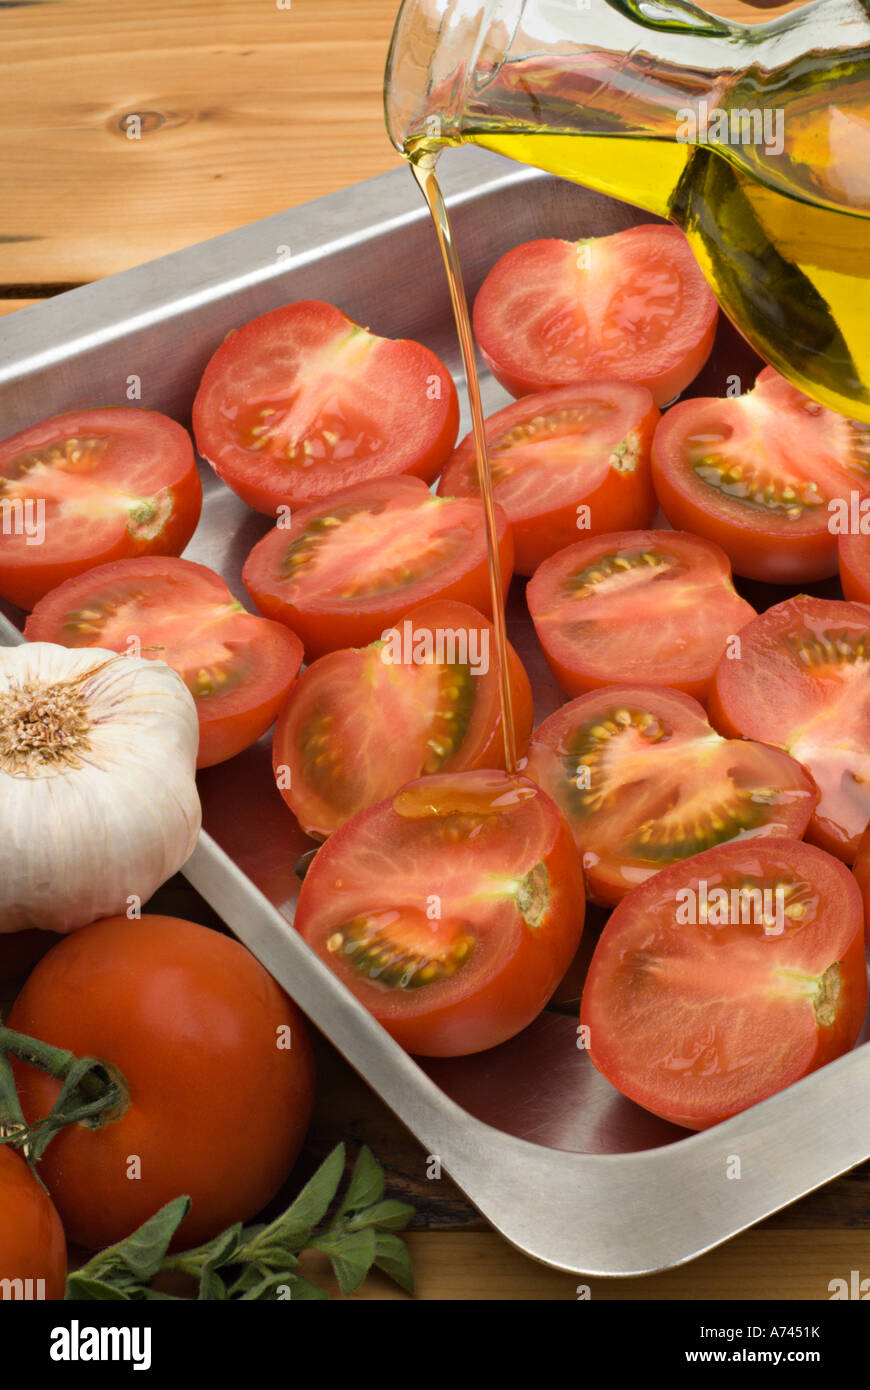 Tomatoes with olive oil pouring over baked tomatoes Stock Photo